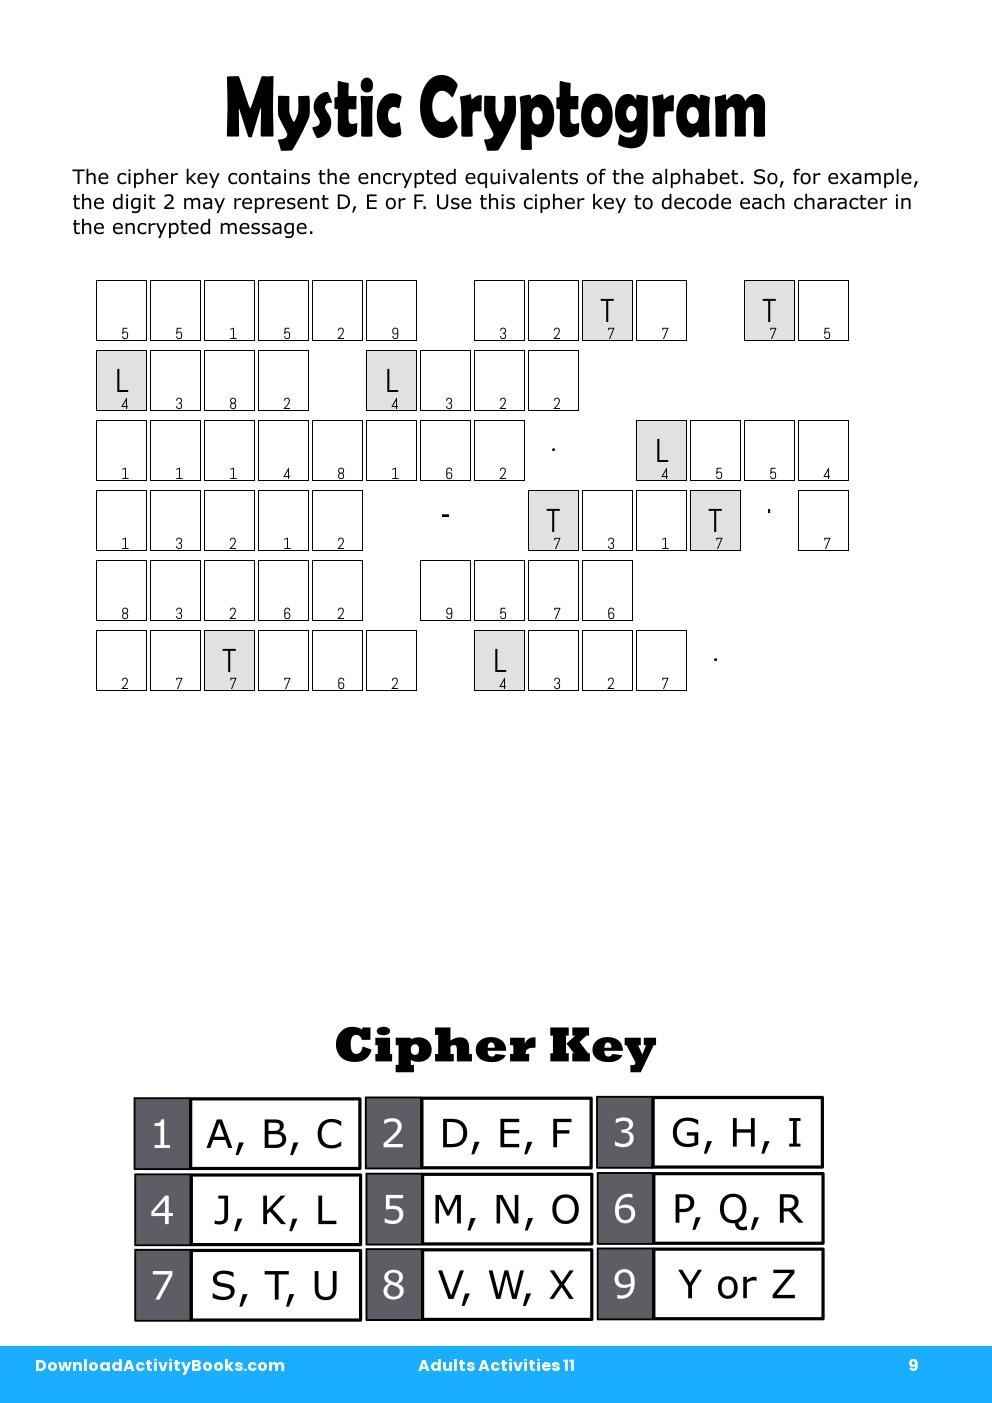 Mystic Cryptogram in Adults Activities 11